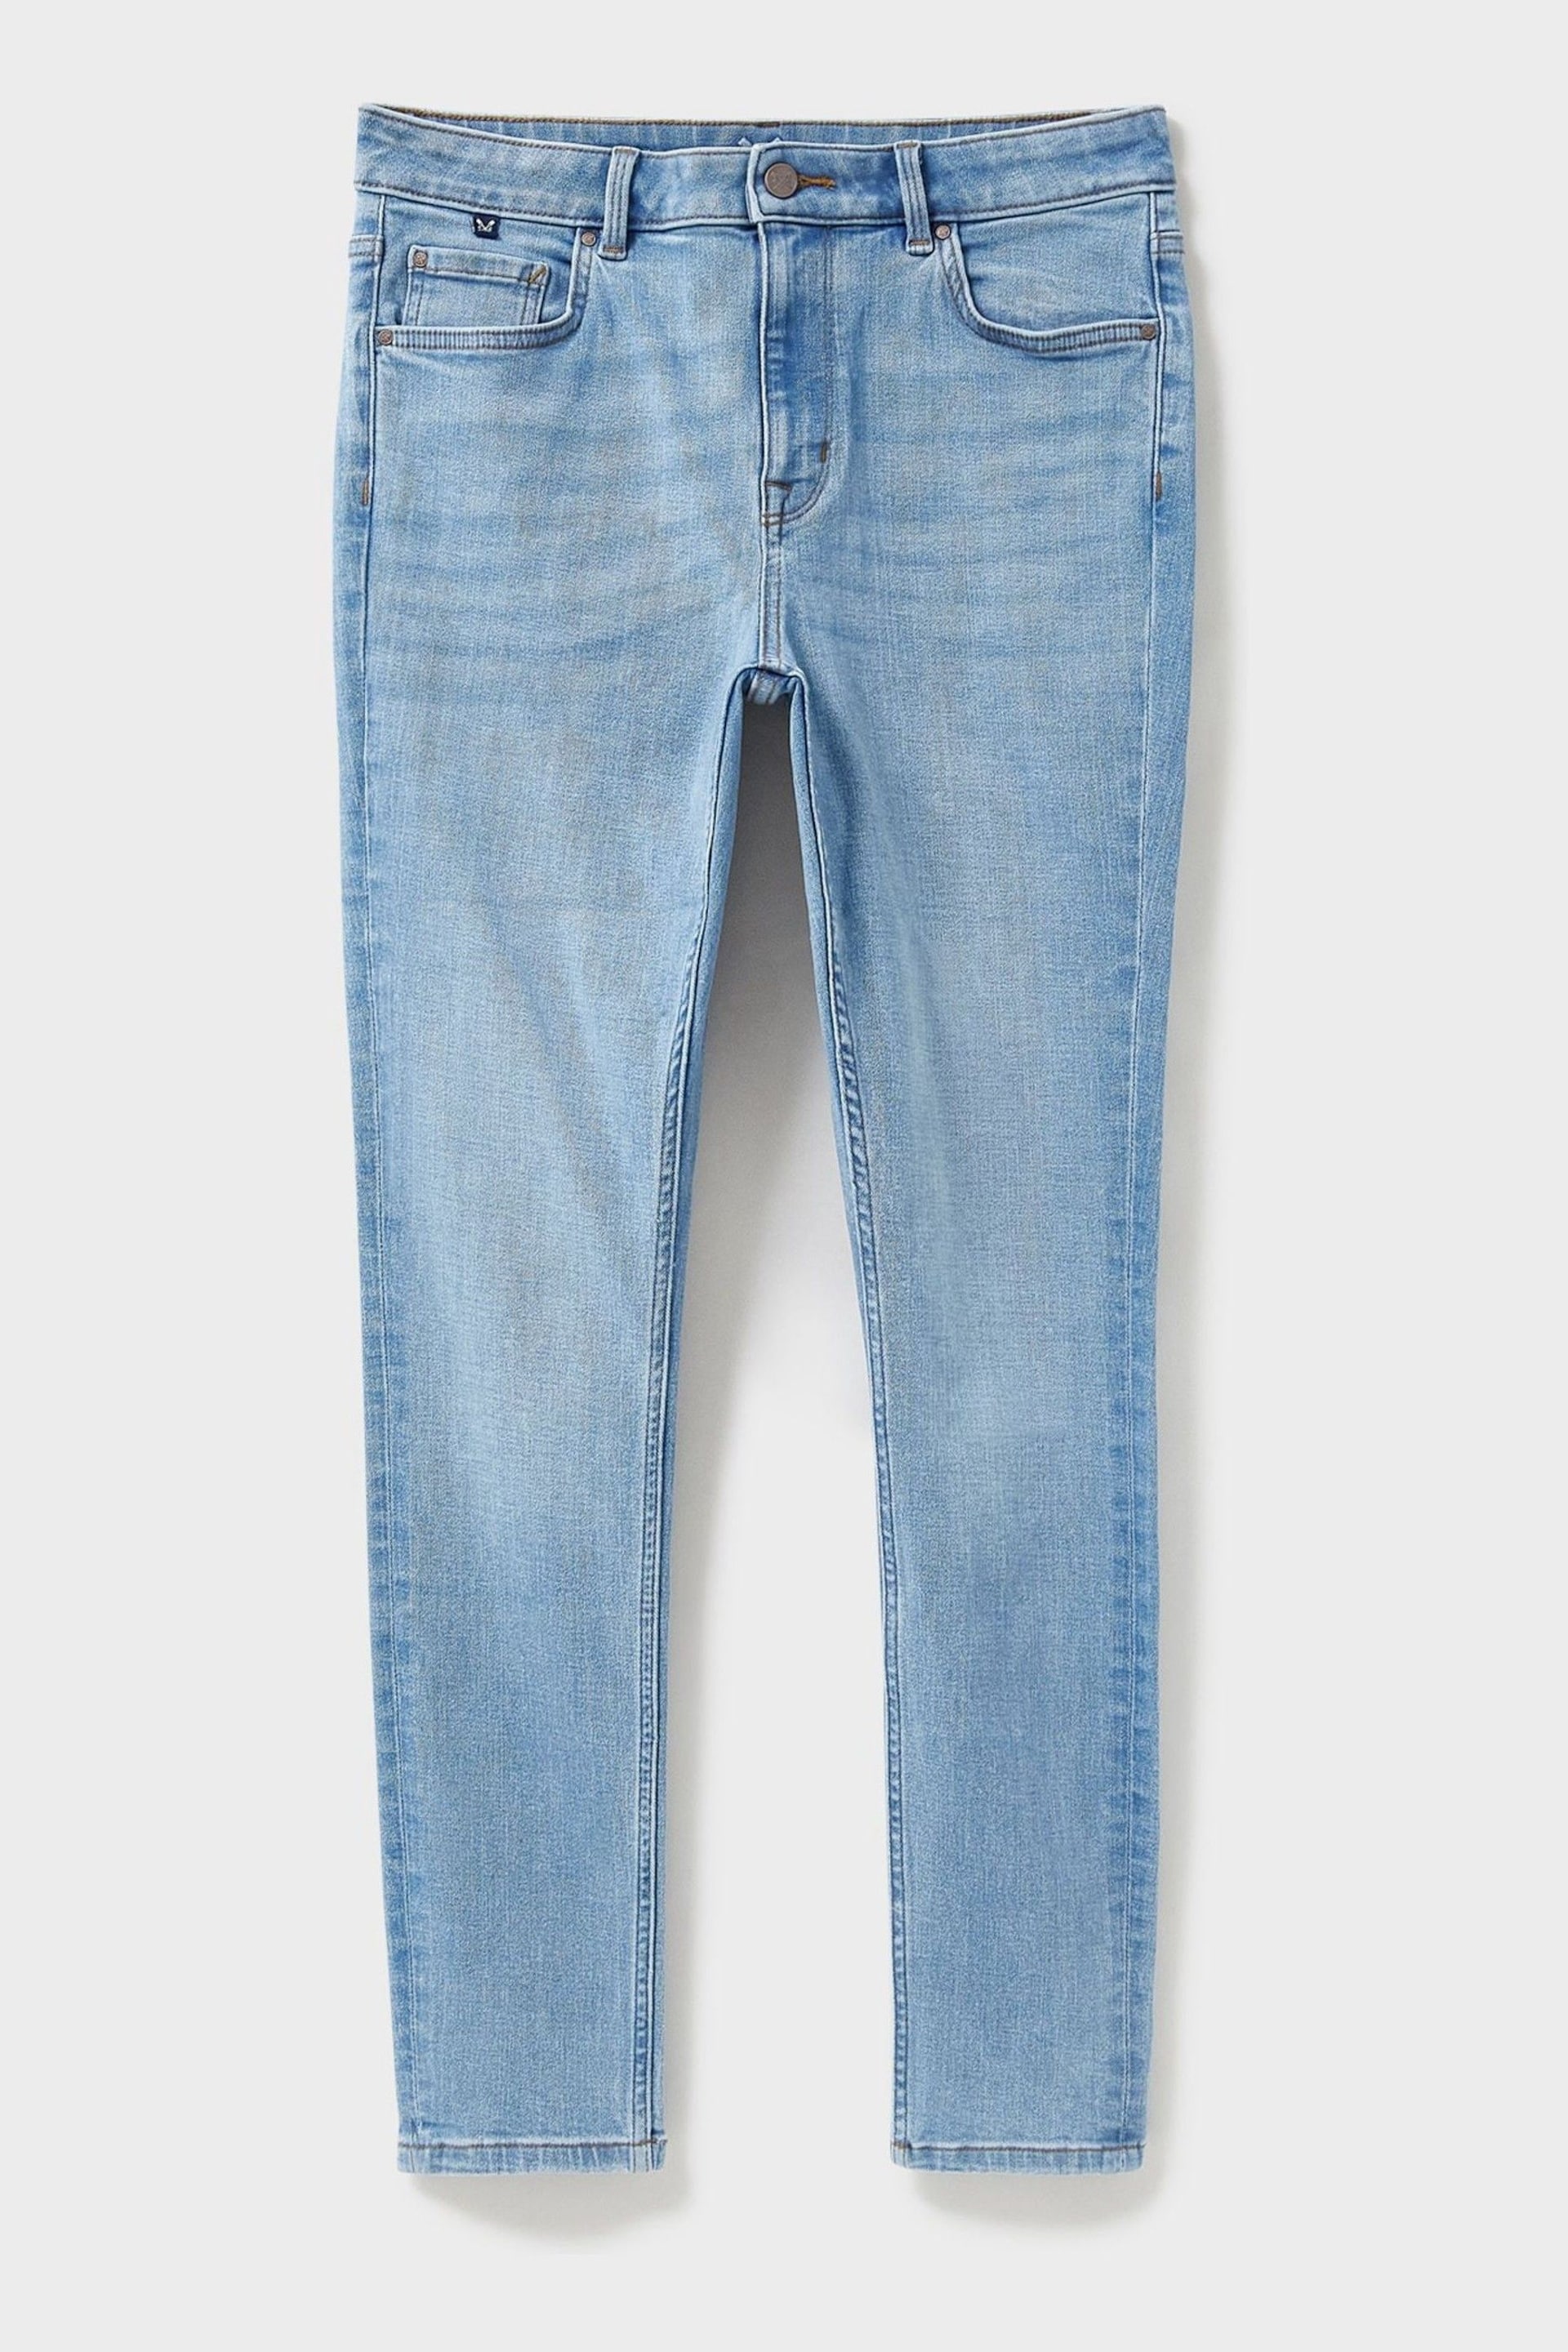 Crew Clothing Skinny Jeans - Image 5 of 5